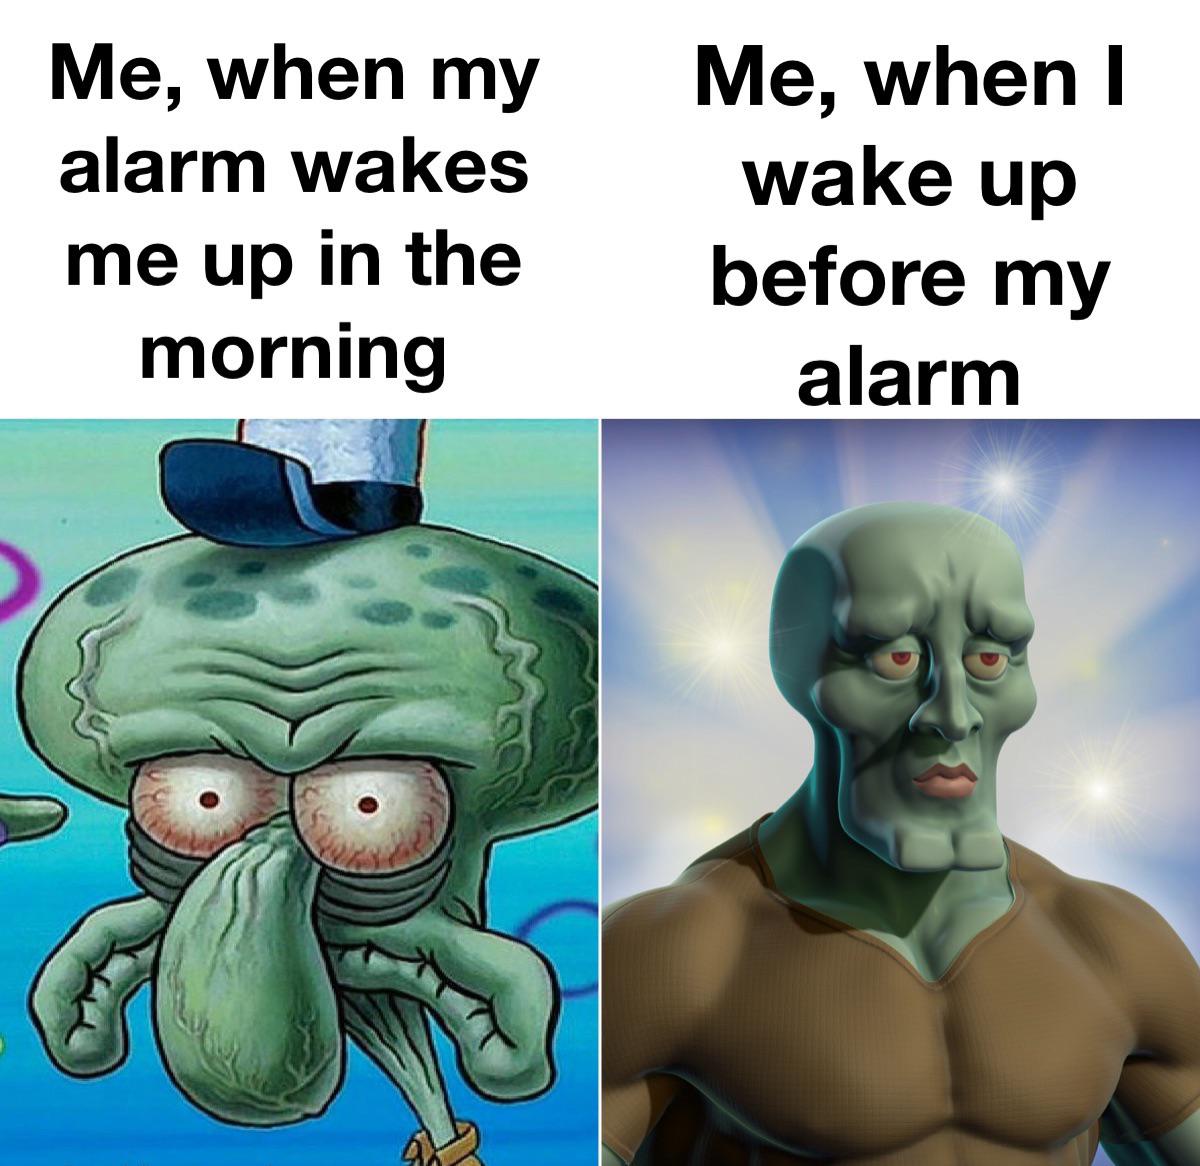 funny memes and pics - cartoon - Me, when my alarm wakes me up in the morning Me, when I wake up before my alarm